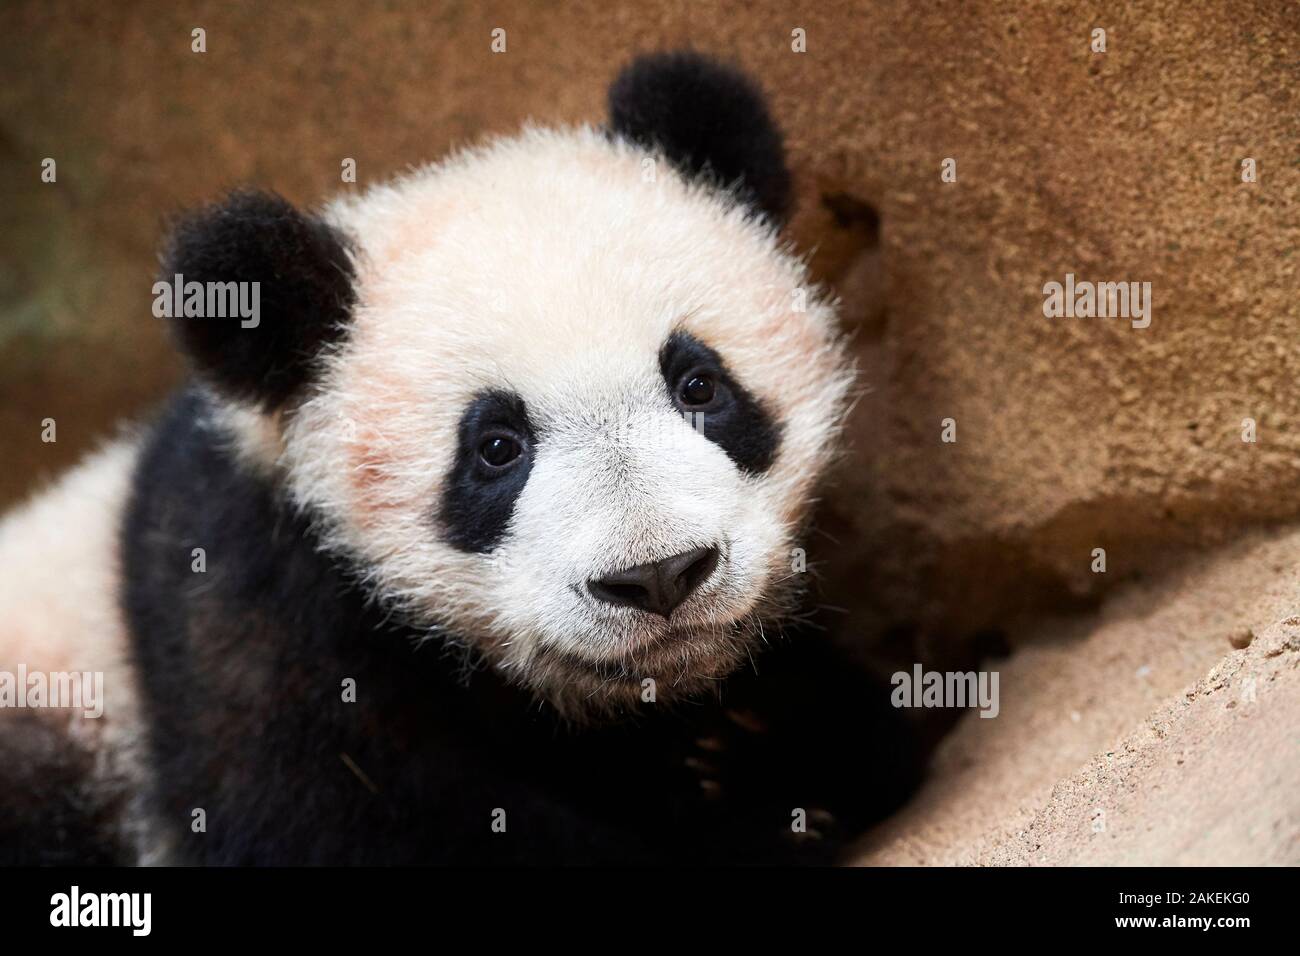 Portrait of Giant panda cub (Ailuropoda melanoleuca) captive. Yuan Meng, first Giant panda ever born in France,  now aged 8 months, Beauval Zoo, France Stock Photo